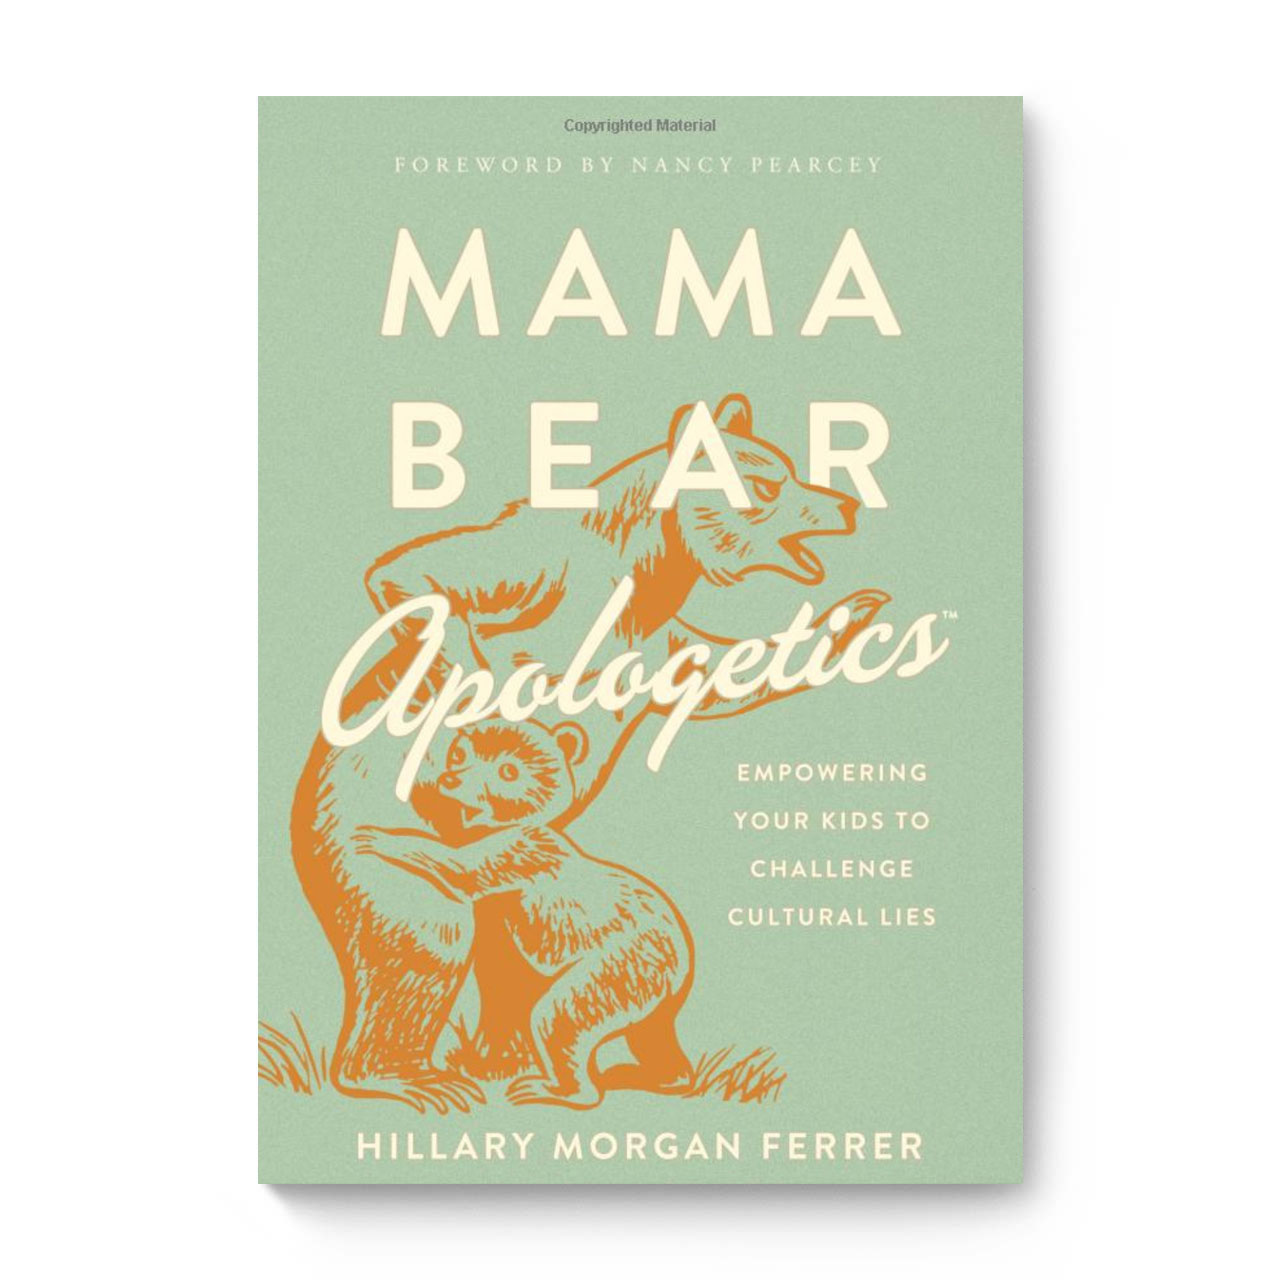 Mama Bear Apologetics: Empowering Your Kids to Challenge Cultural